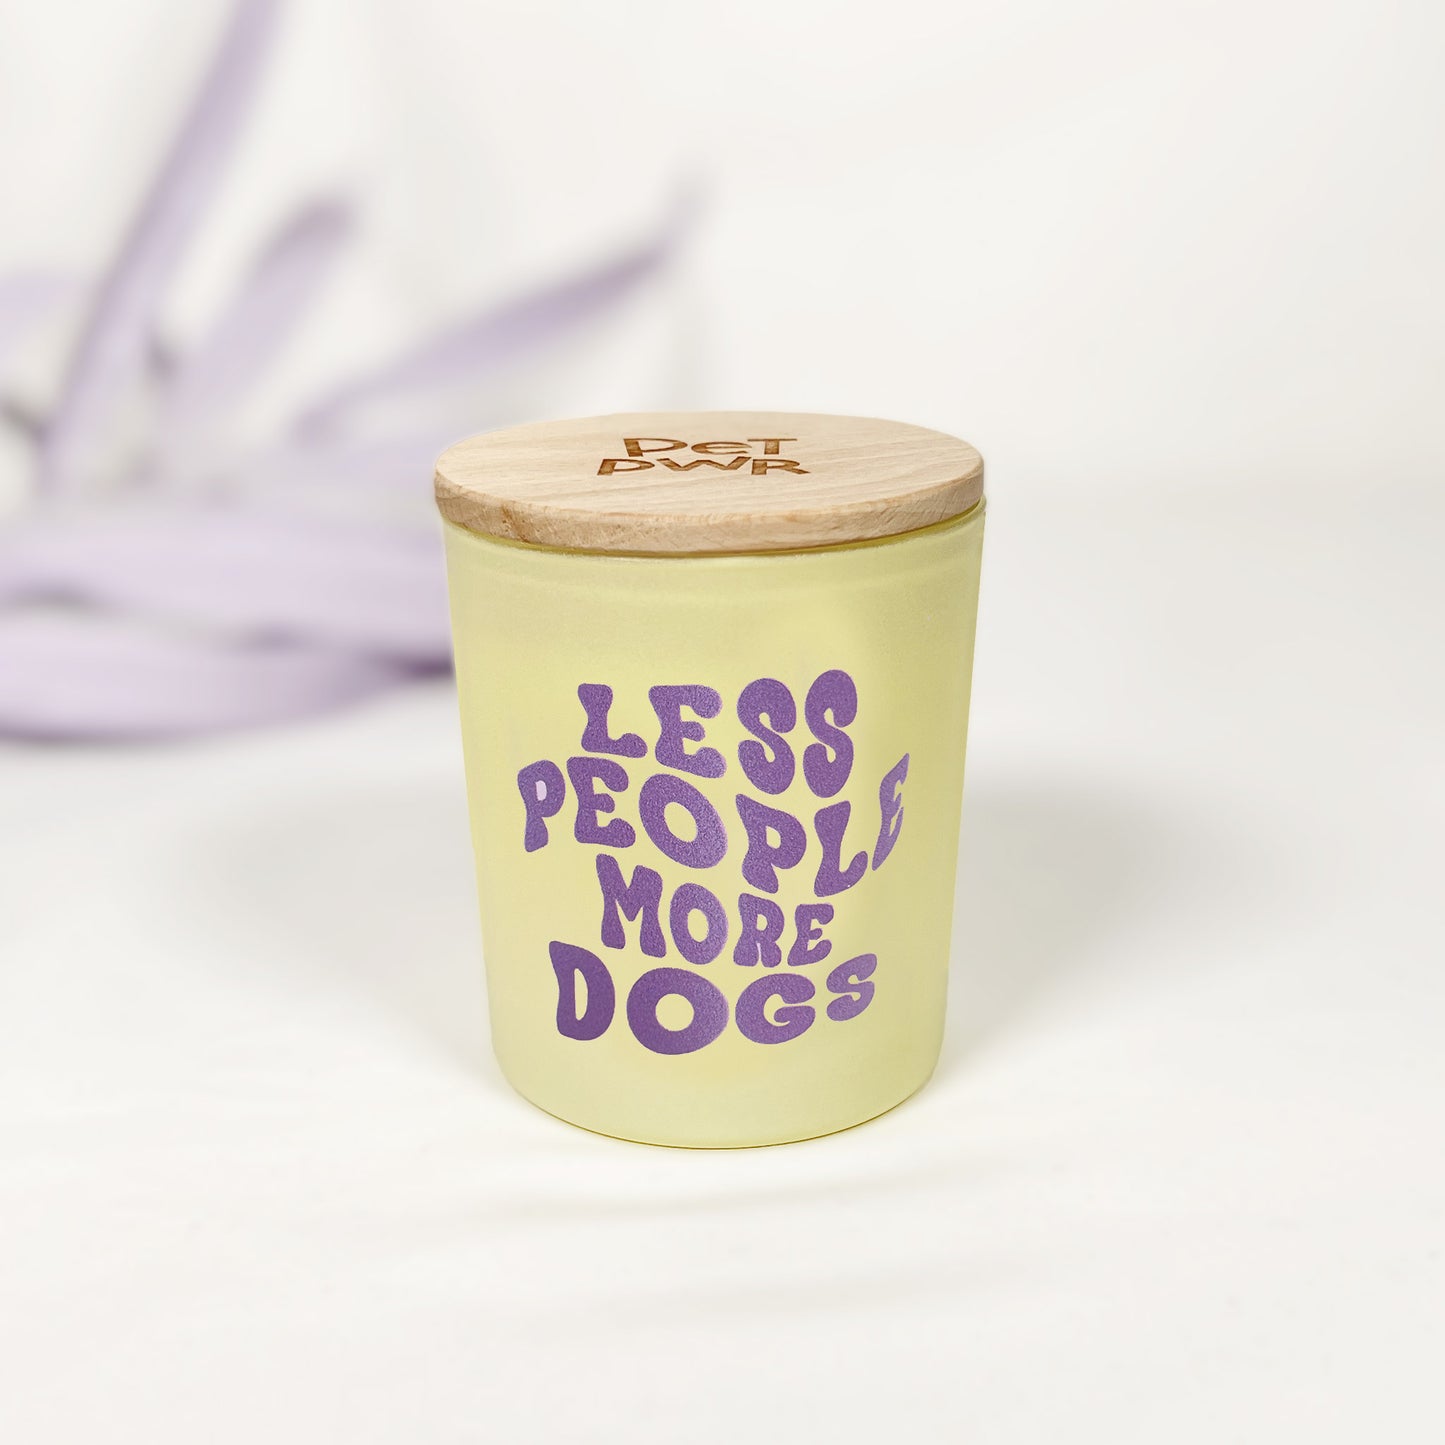 Candela "Less people more dogs" +🐶 - 🙅🏻‍♀️